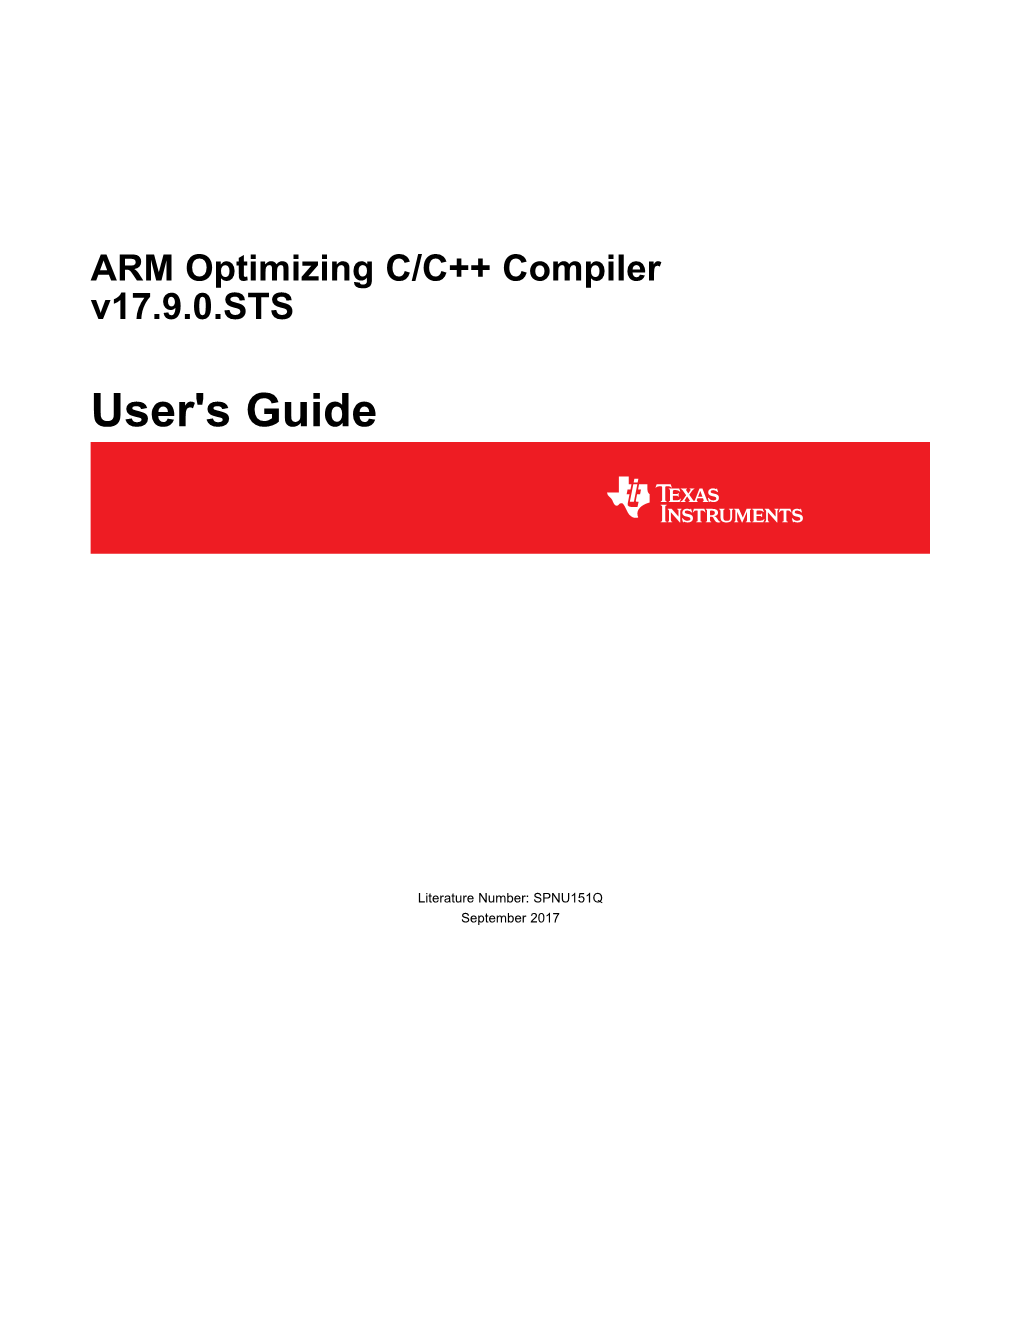 ARM Optimizing C/C++ Compiler V17.9.0.STS User's Guide